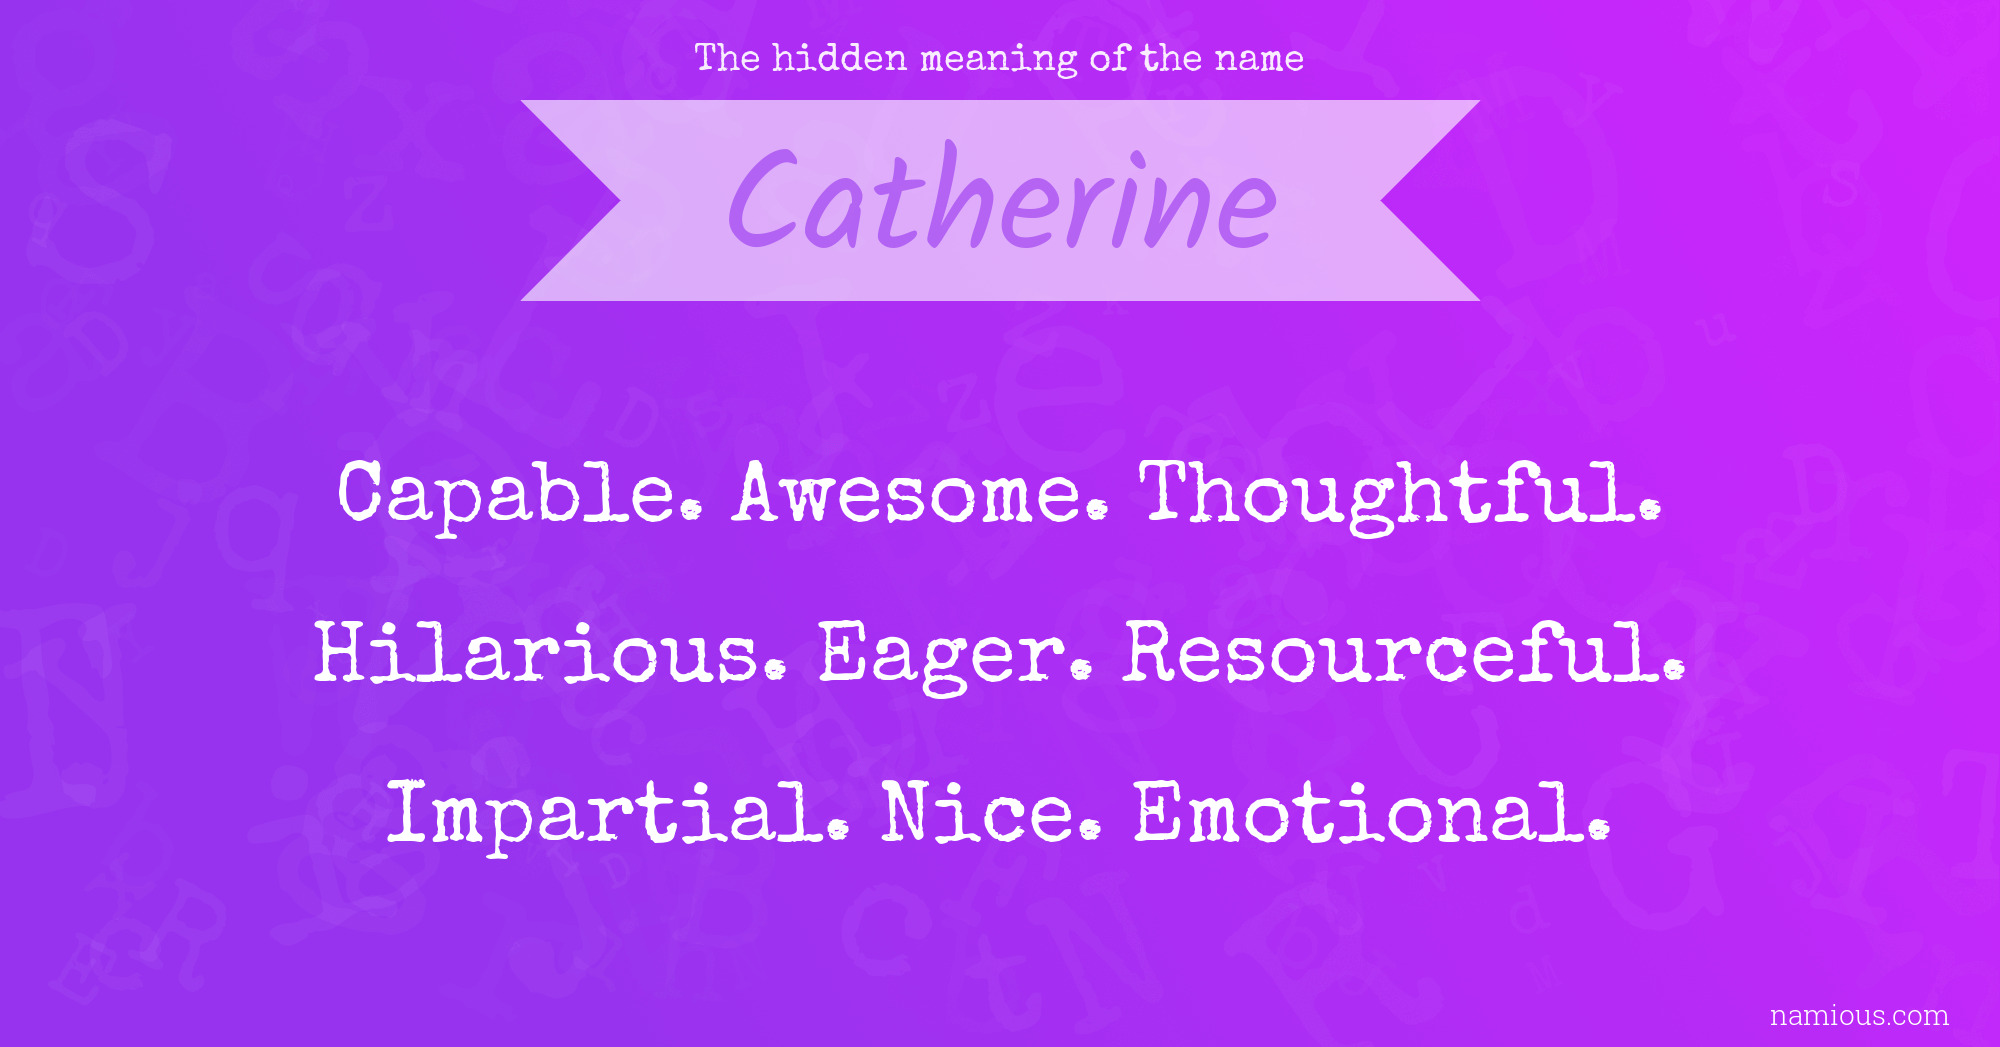 The hidden meaning of the name Catherine